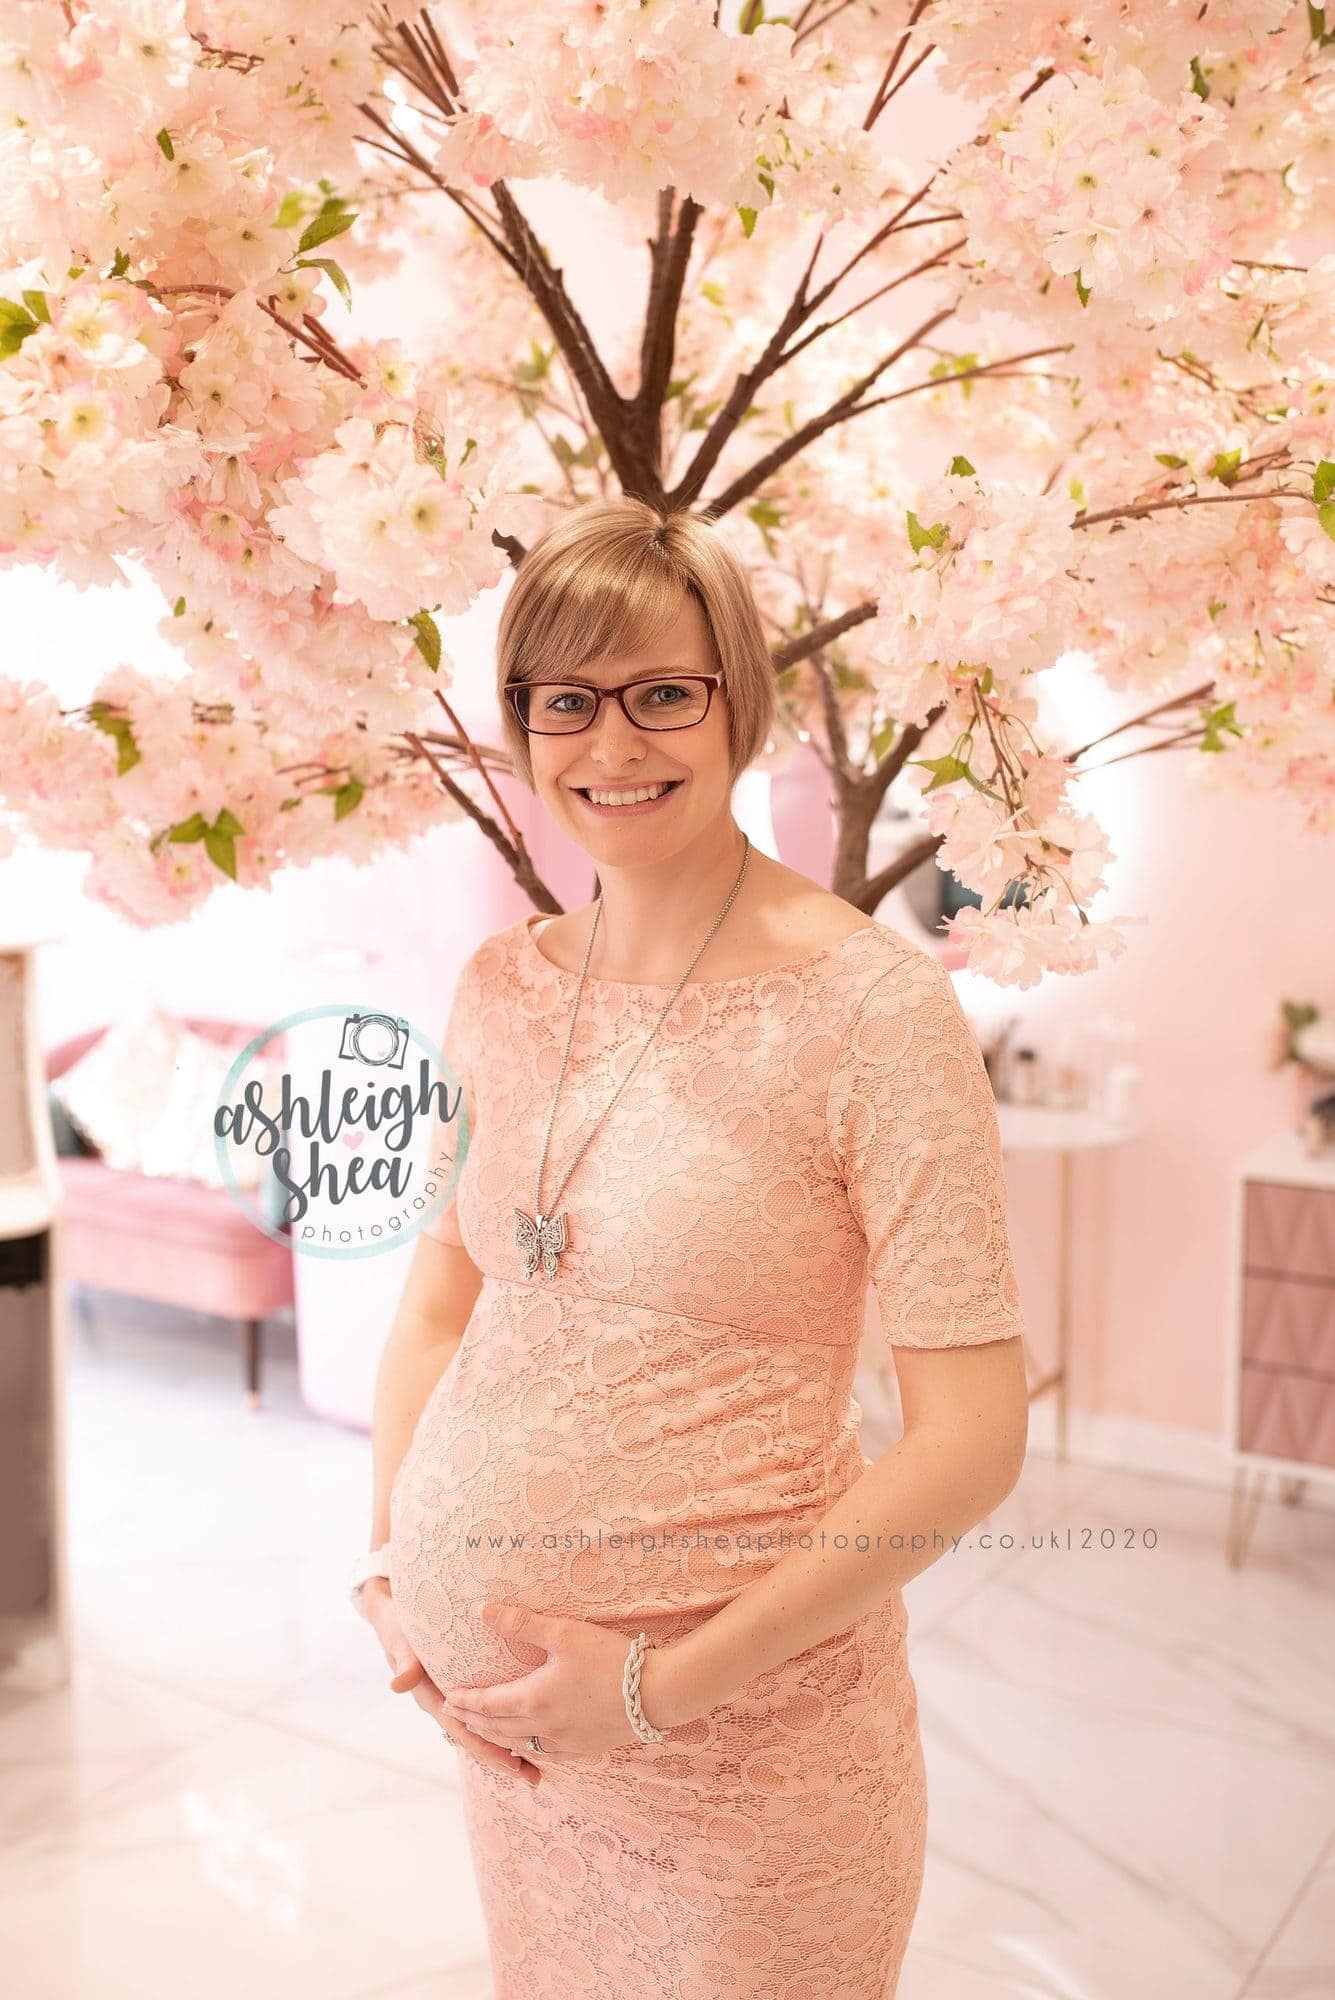 Blossom Tree, Mum To Be, Maternity Photos, Pregnancy Pictures, Ashleigh Shea Photography, Bromley, Sidcup, London,Kent